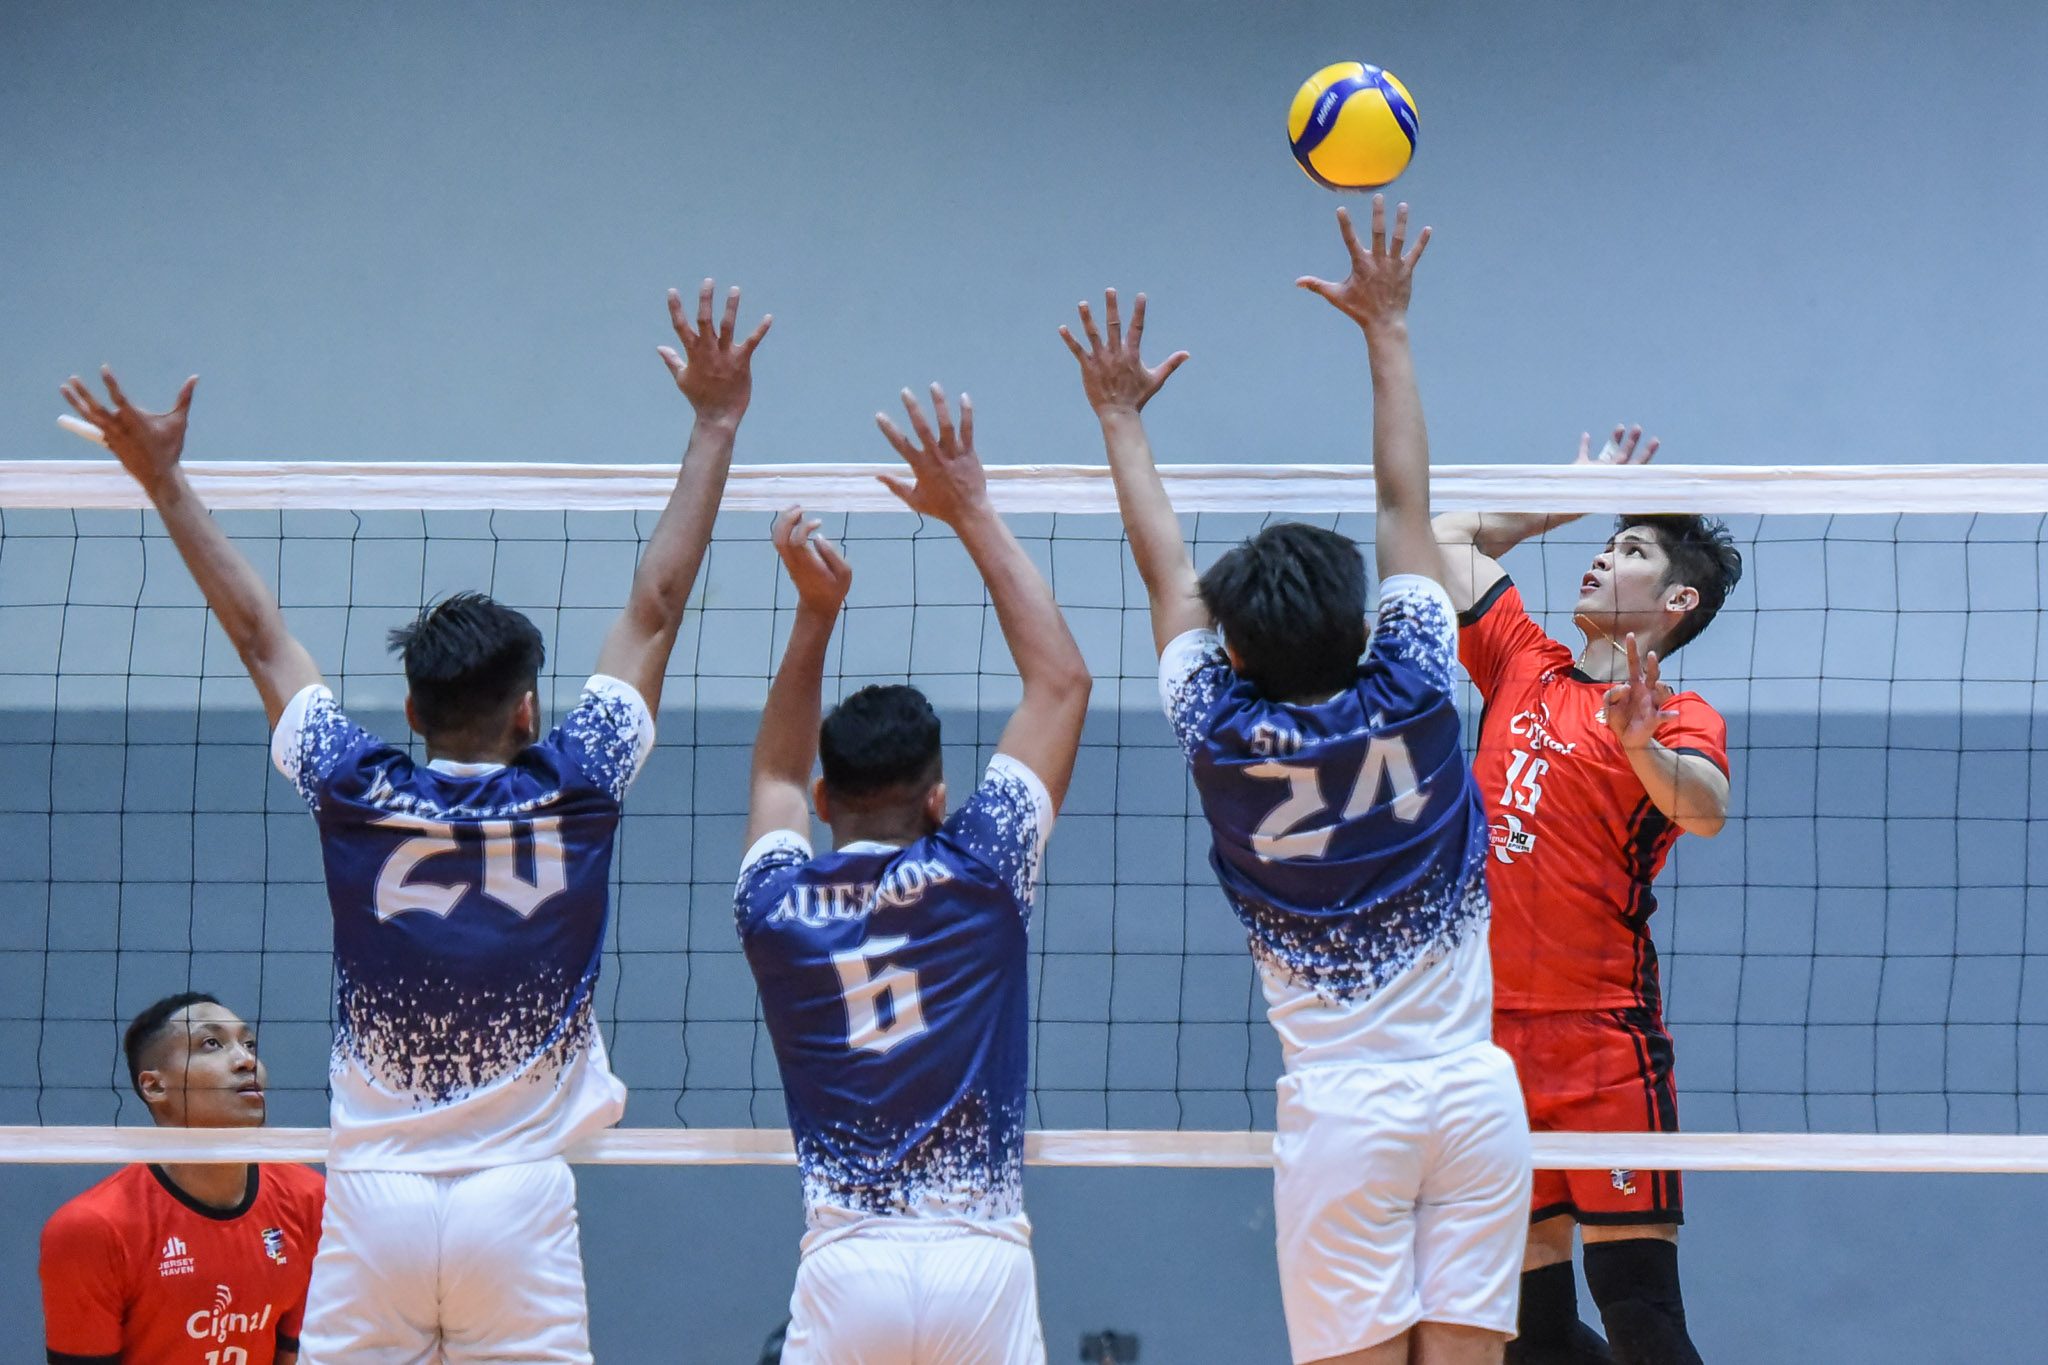 Spikers’ Turf: Cignal cruises to 4th sweep; VNS escapes Air Force in 4 tight sets